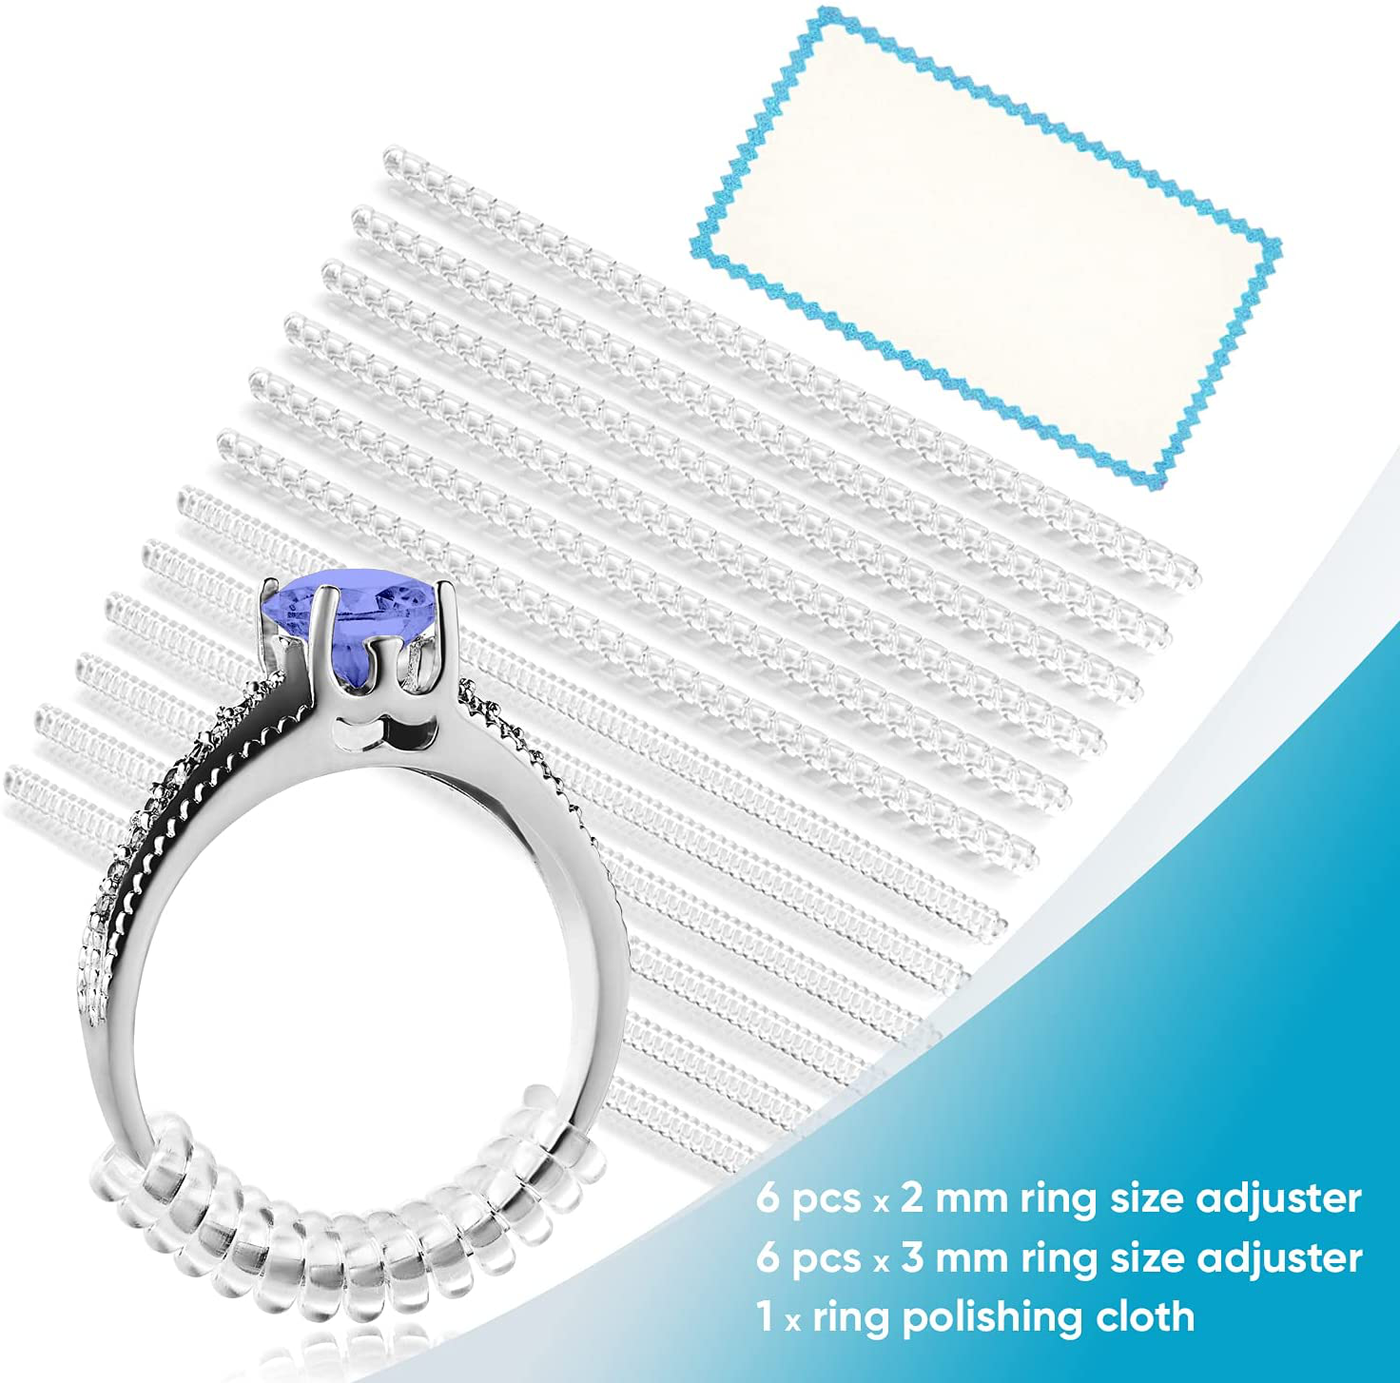 Ring Size Adjuster for Loose Rings - 12 Pack, 2 Sizes - Jewelry Sizer, Mandrel for Making Jewelry Guard, Spacer, Sizer, Fitter - Spiral Silicone Tightener Set with Polishing Cloth